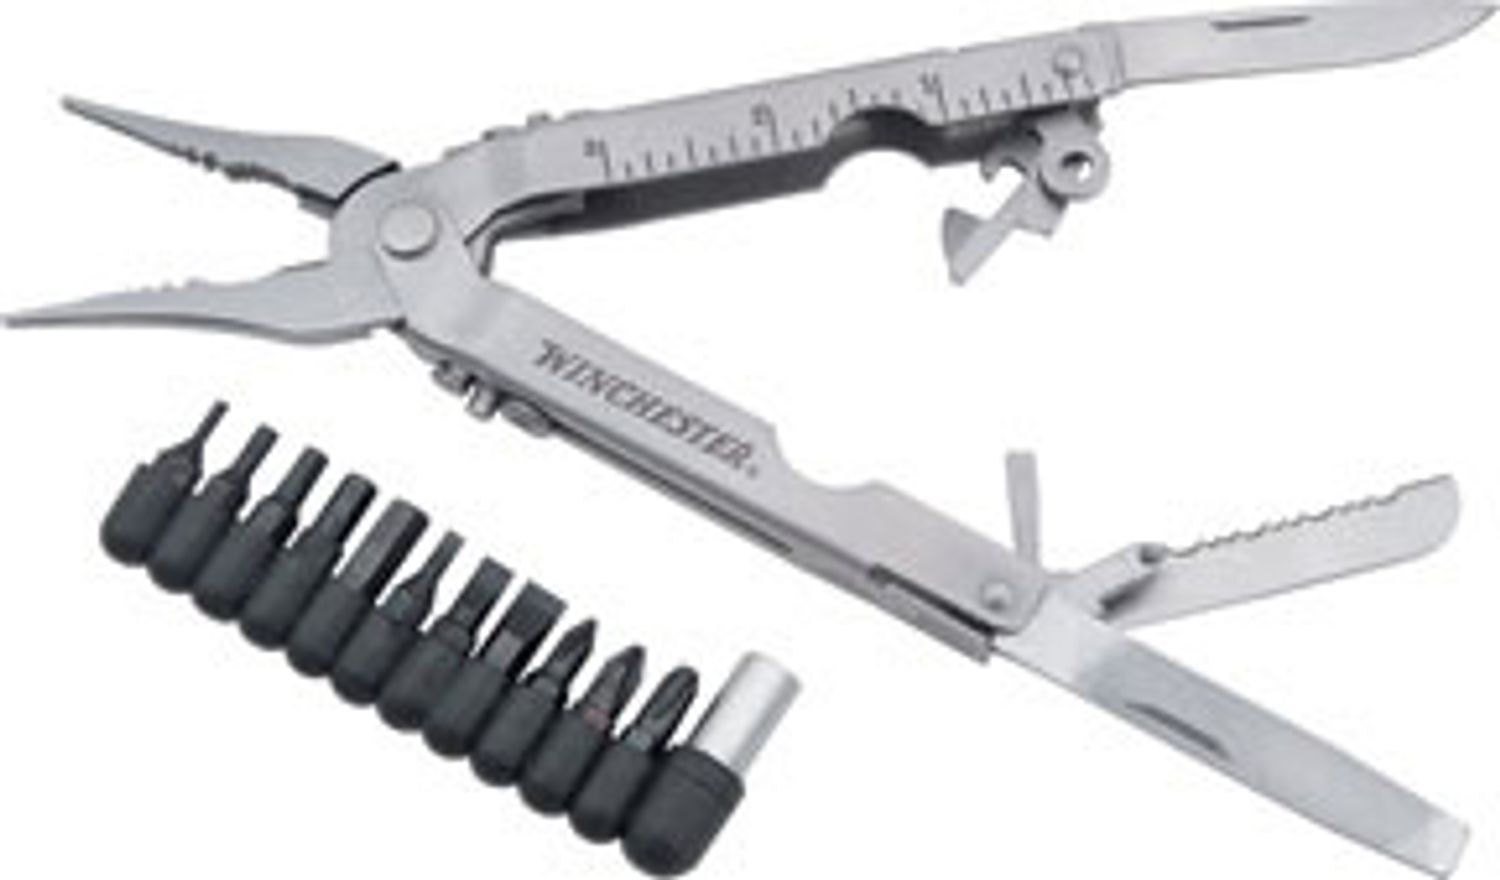 Winchester Fisherman's Multi-Tool with Tool Kit, 4-1/2 Closed -  KnifeCenter - GB49416 - Discontinued